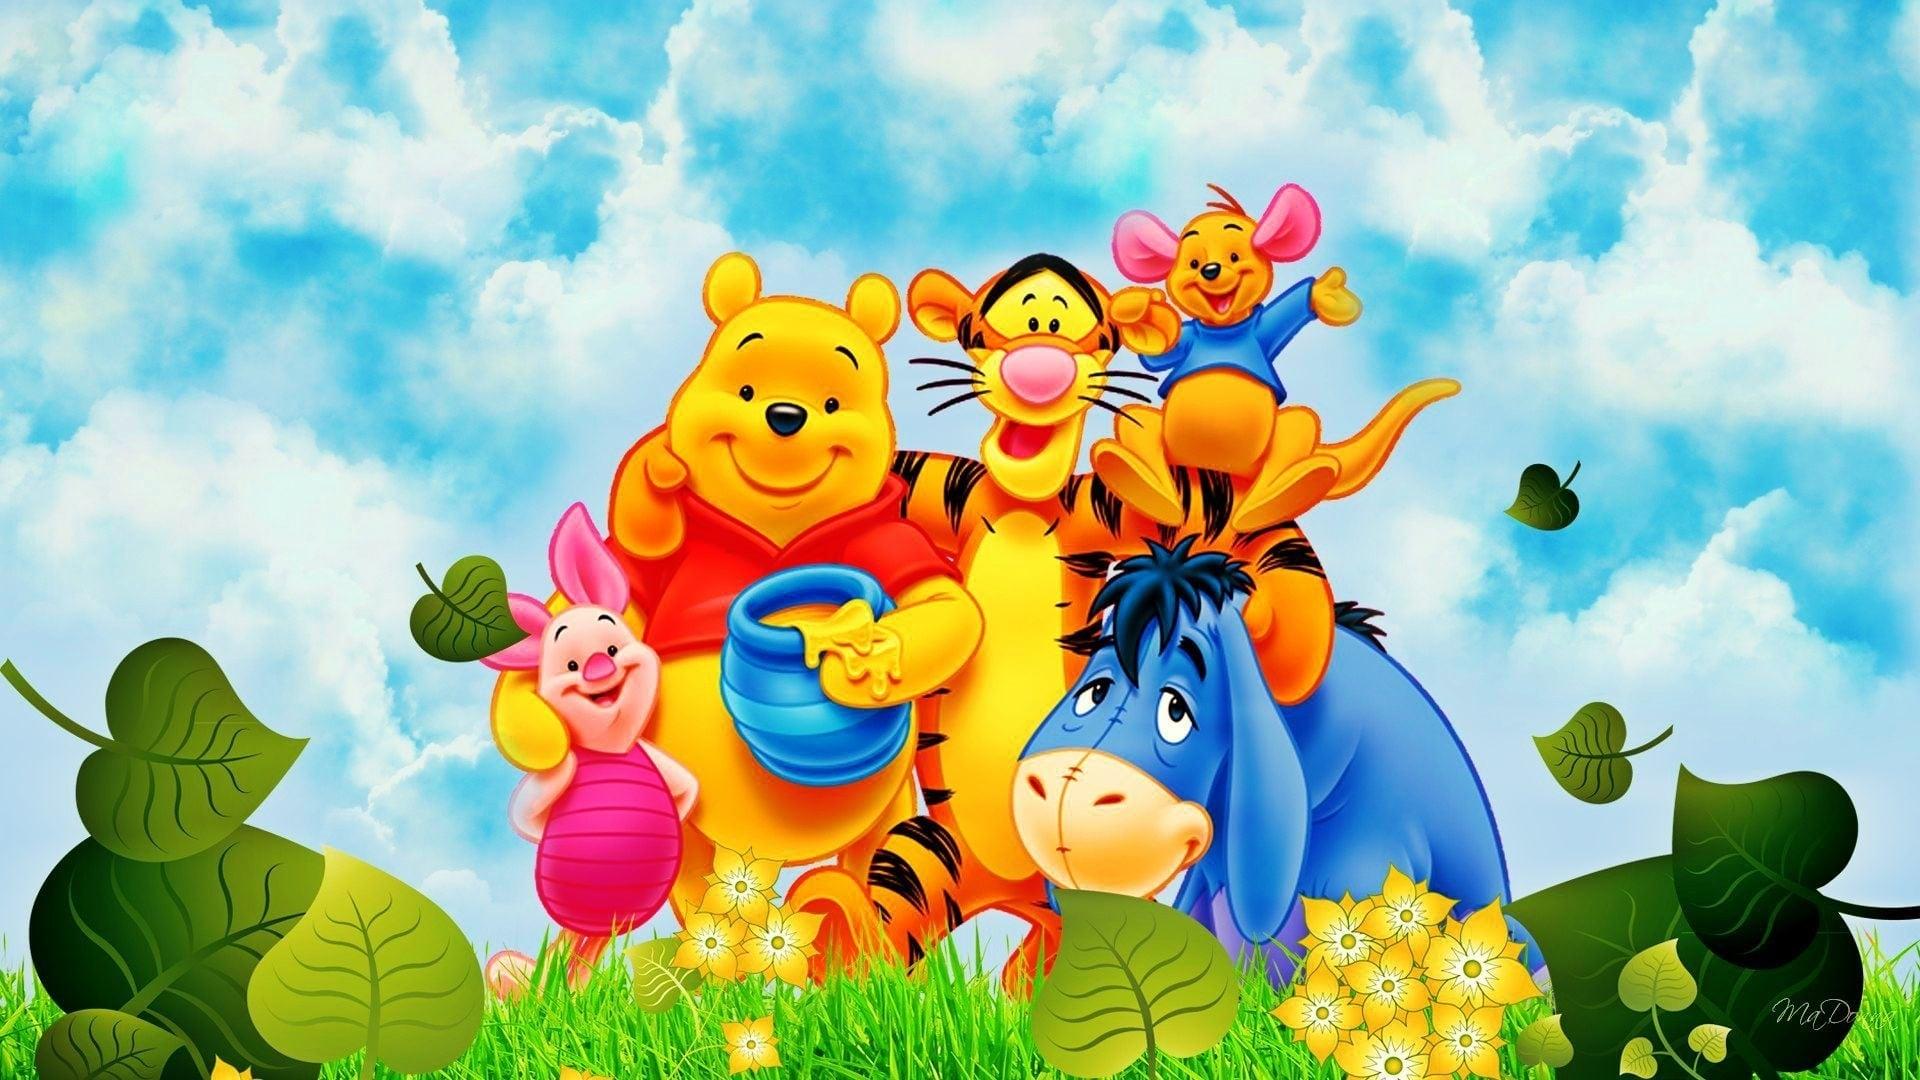 The Magical World of Winnie the Pooh: All for One, One for All backdrop